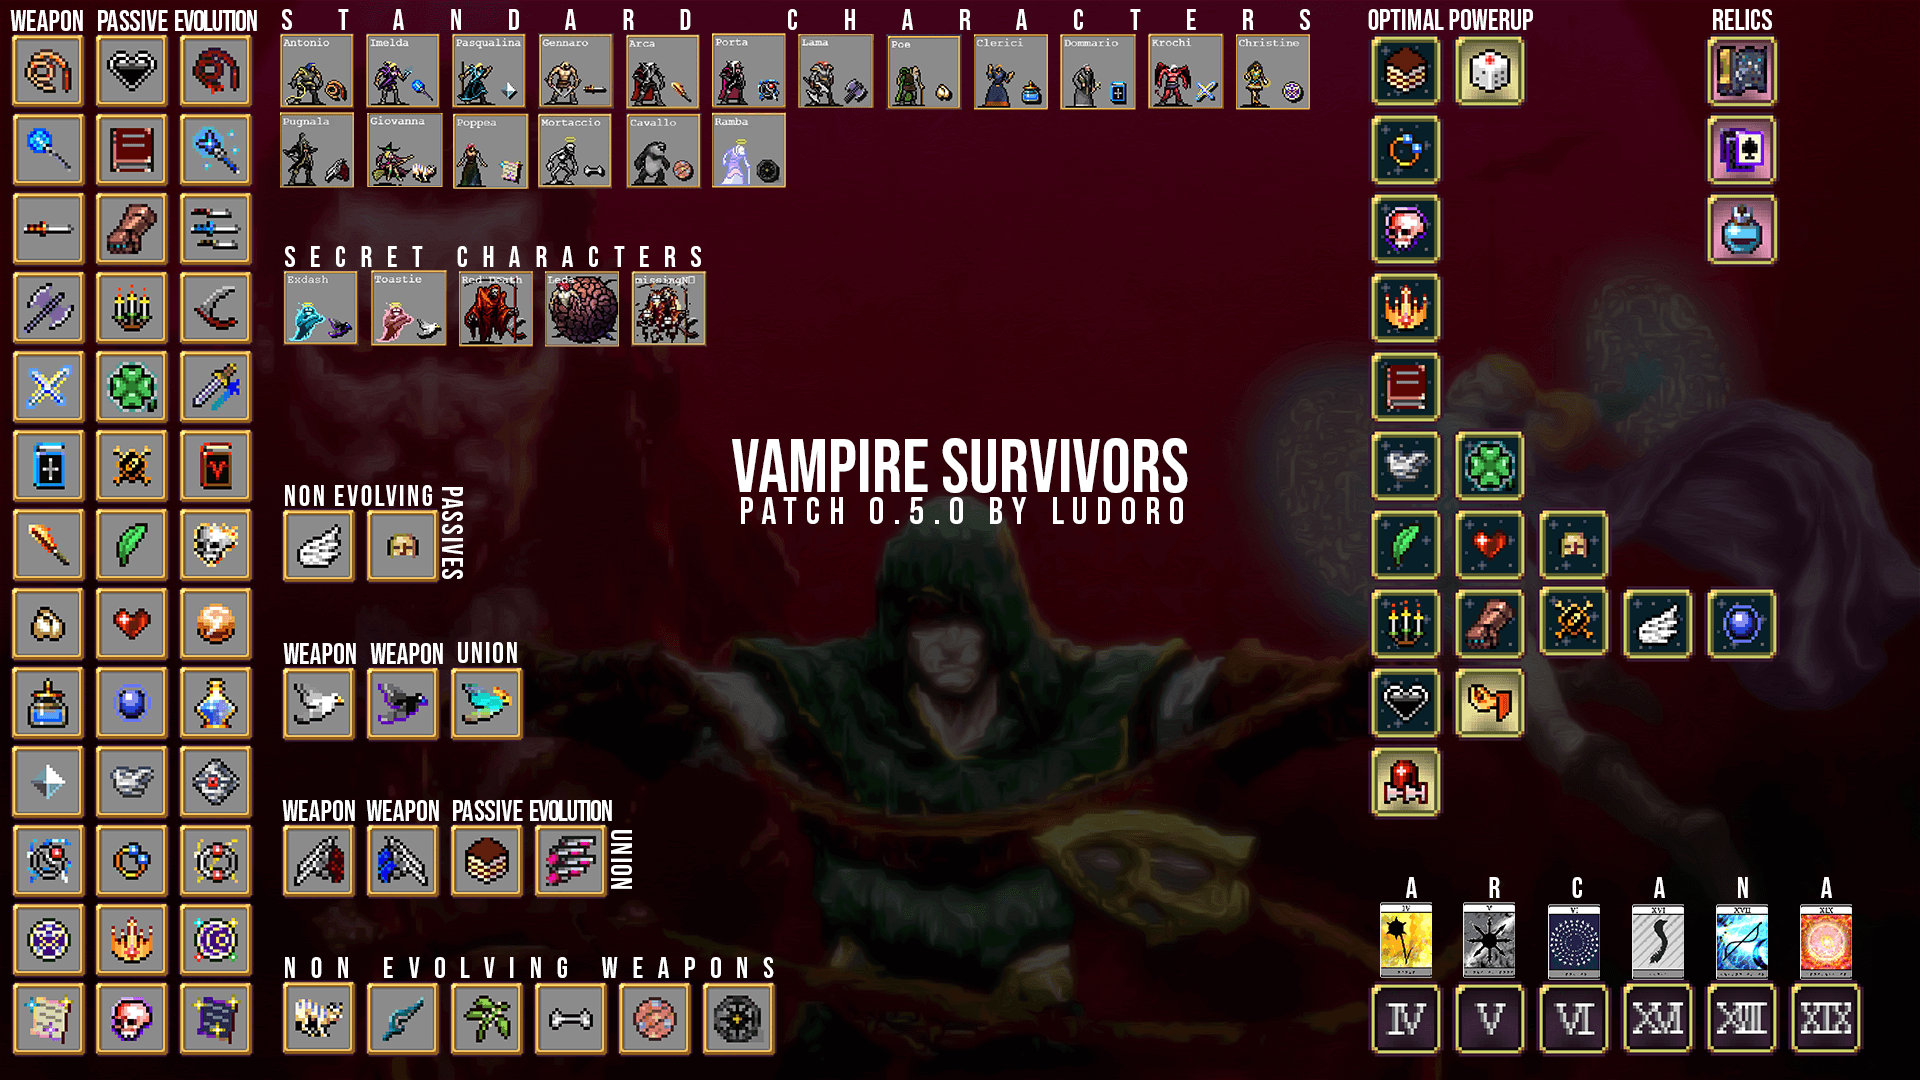 Vampire Survivors Reference Sheet Information - Patch 0.5.0 - Reference Sheet - Patch 0.5.0 - 950A552